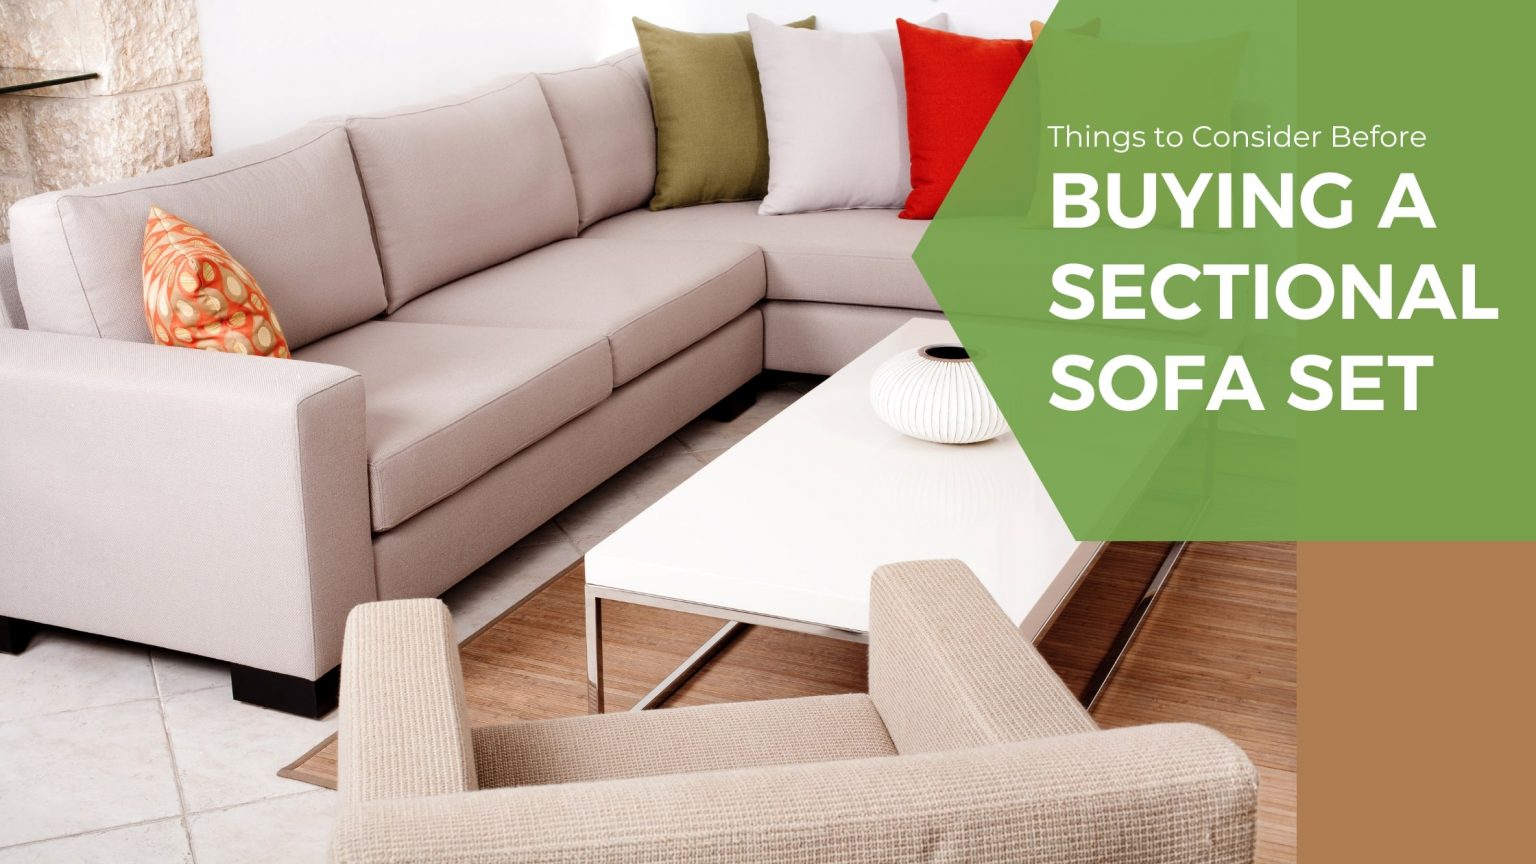 Things to Consider Before Buying a Sectional Sofa Set